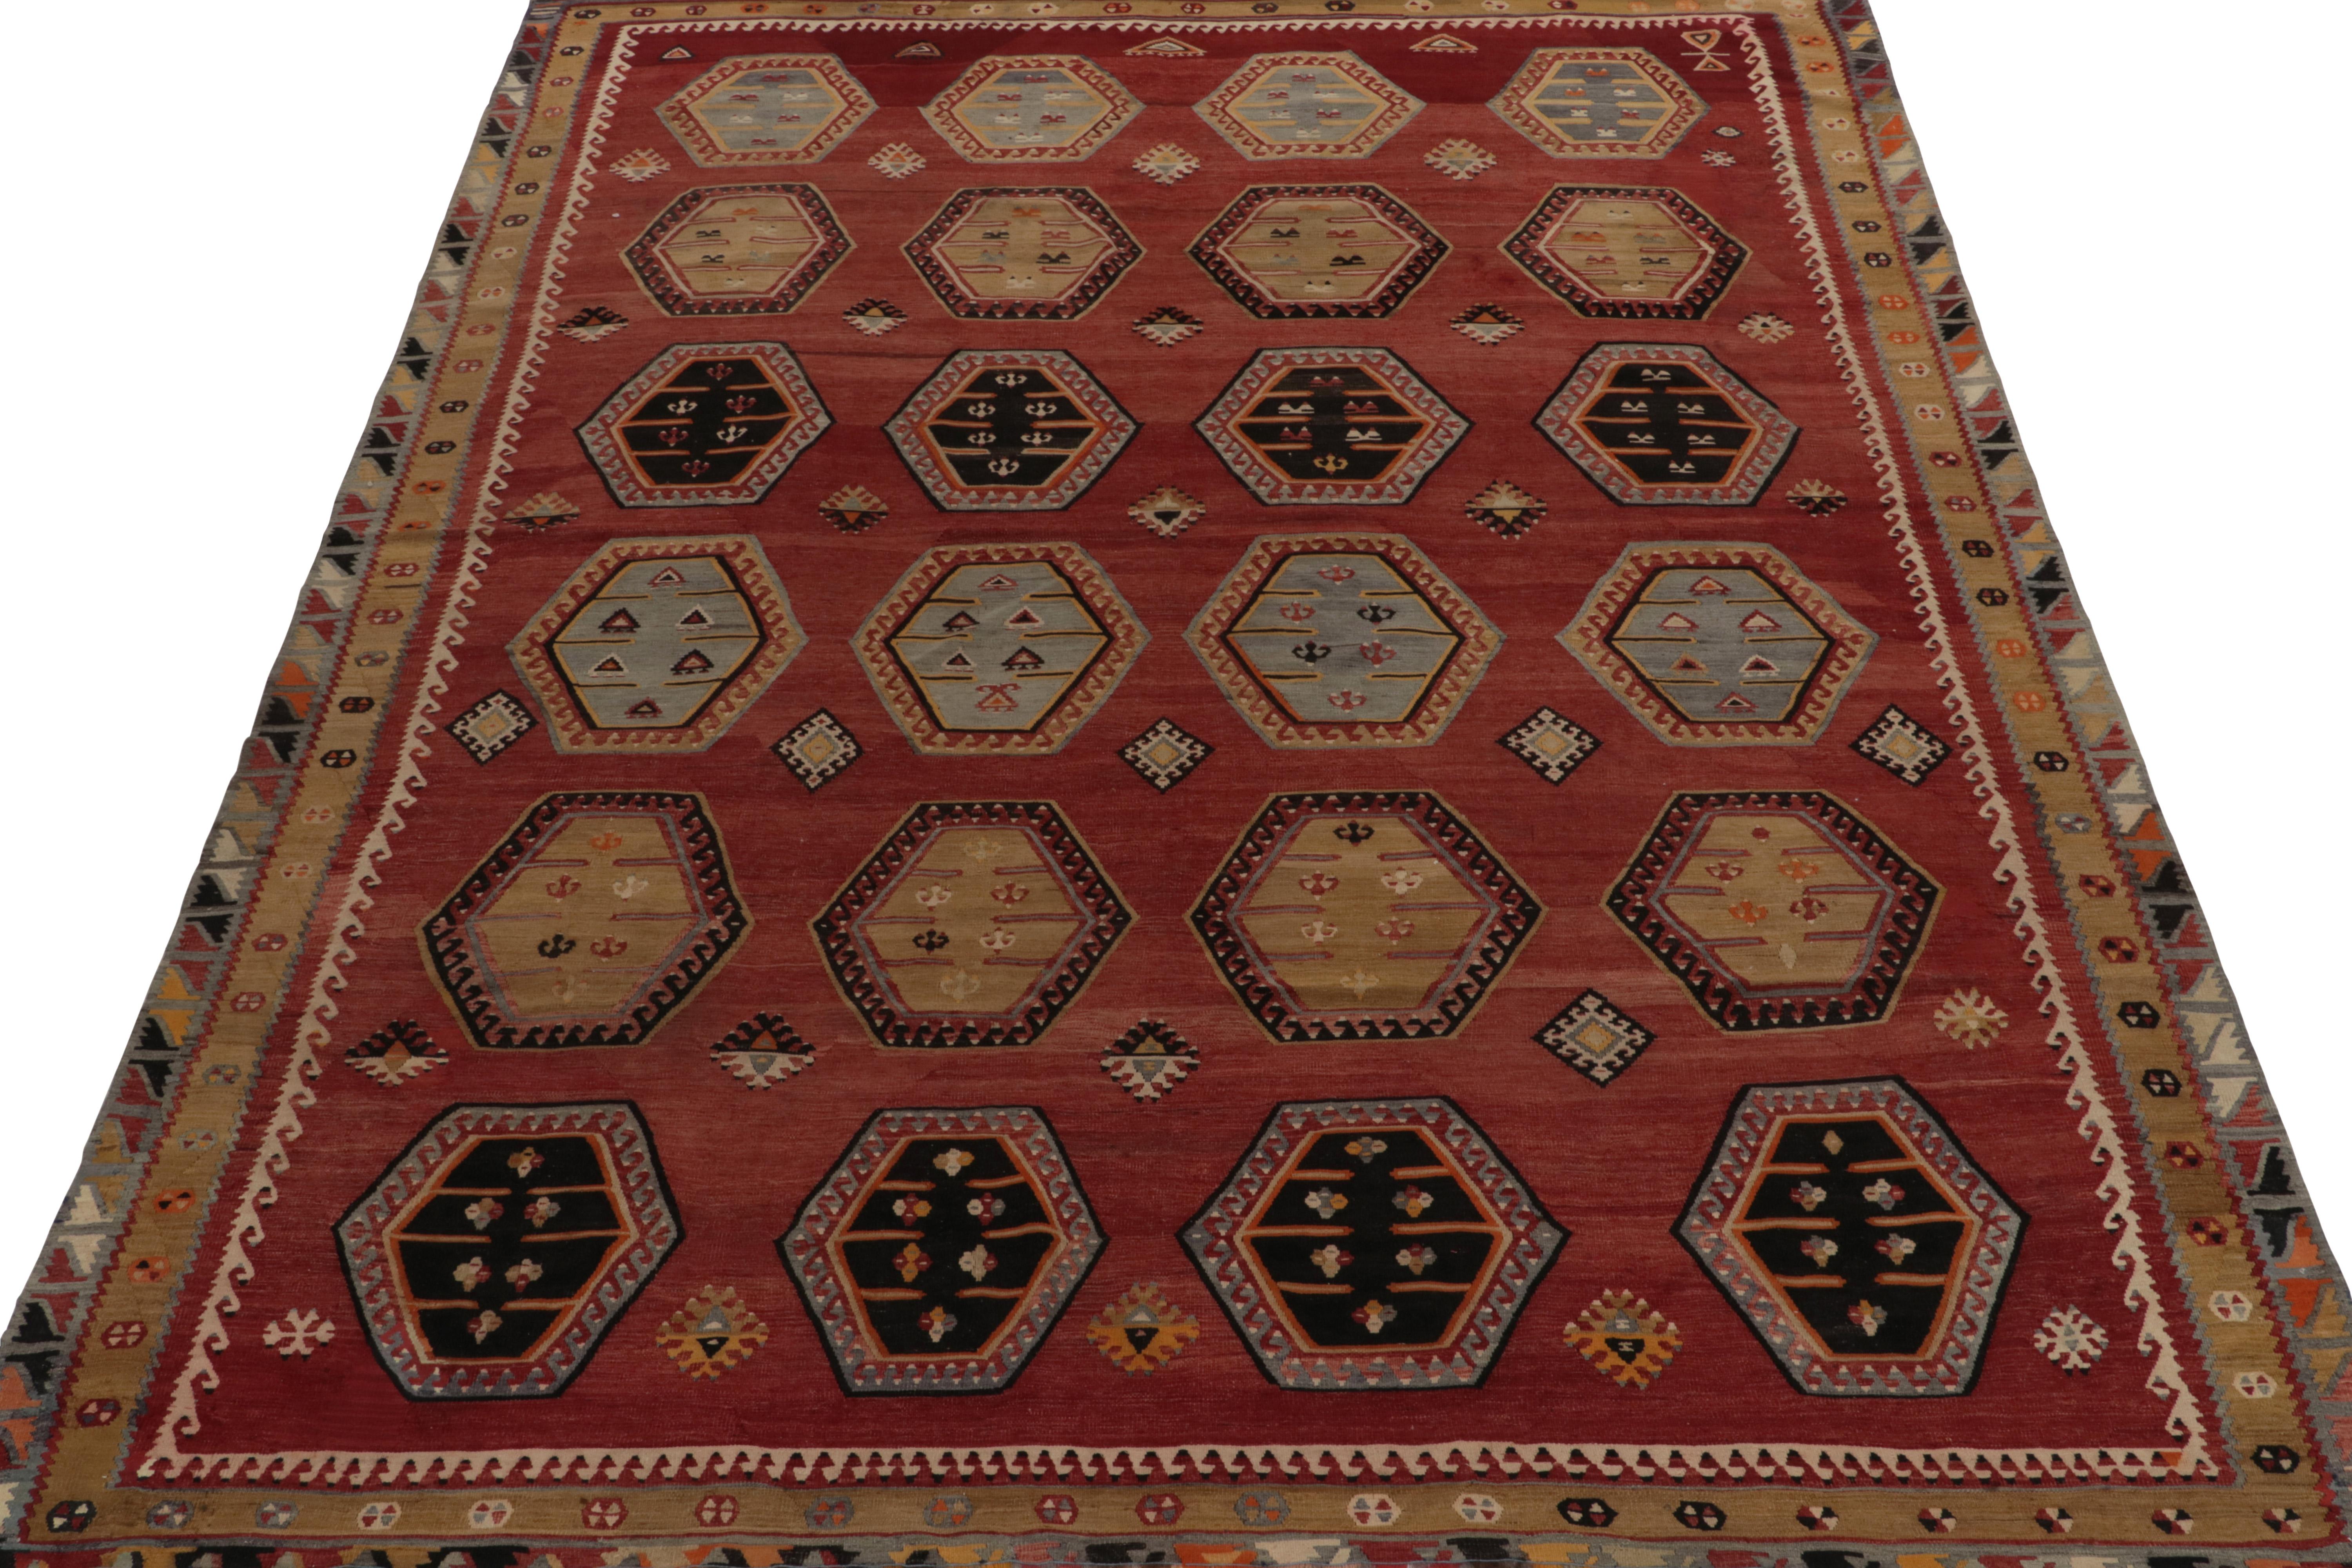 Hand-Woven Vintage Turkish Kilim rug in Red, Brown Blue Geometric Patterns by Rug & Kilim For Sale